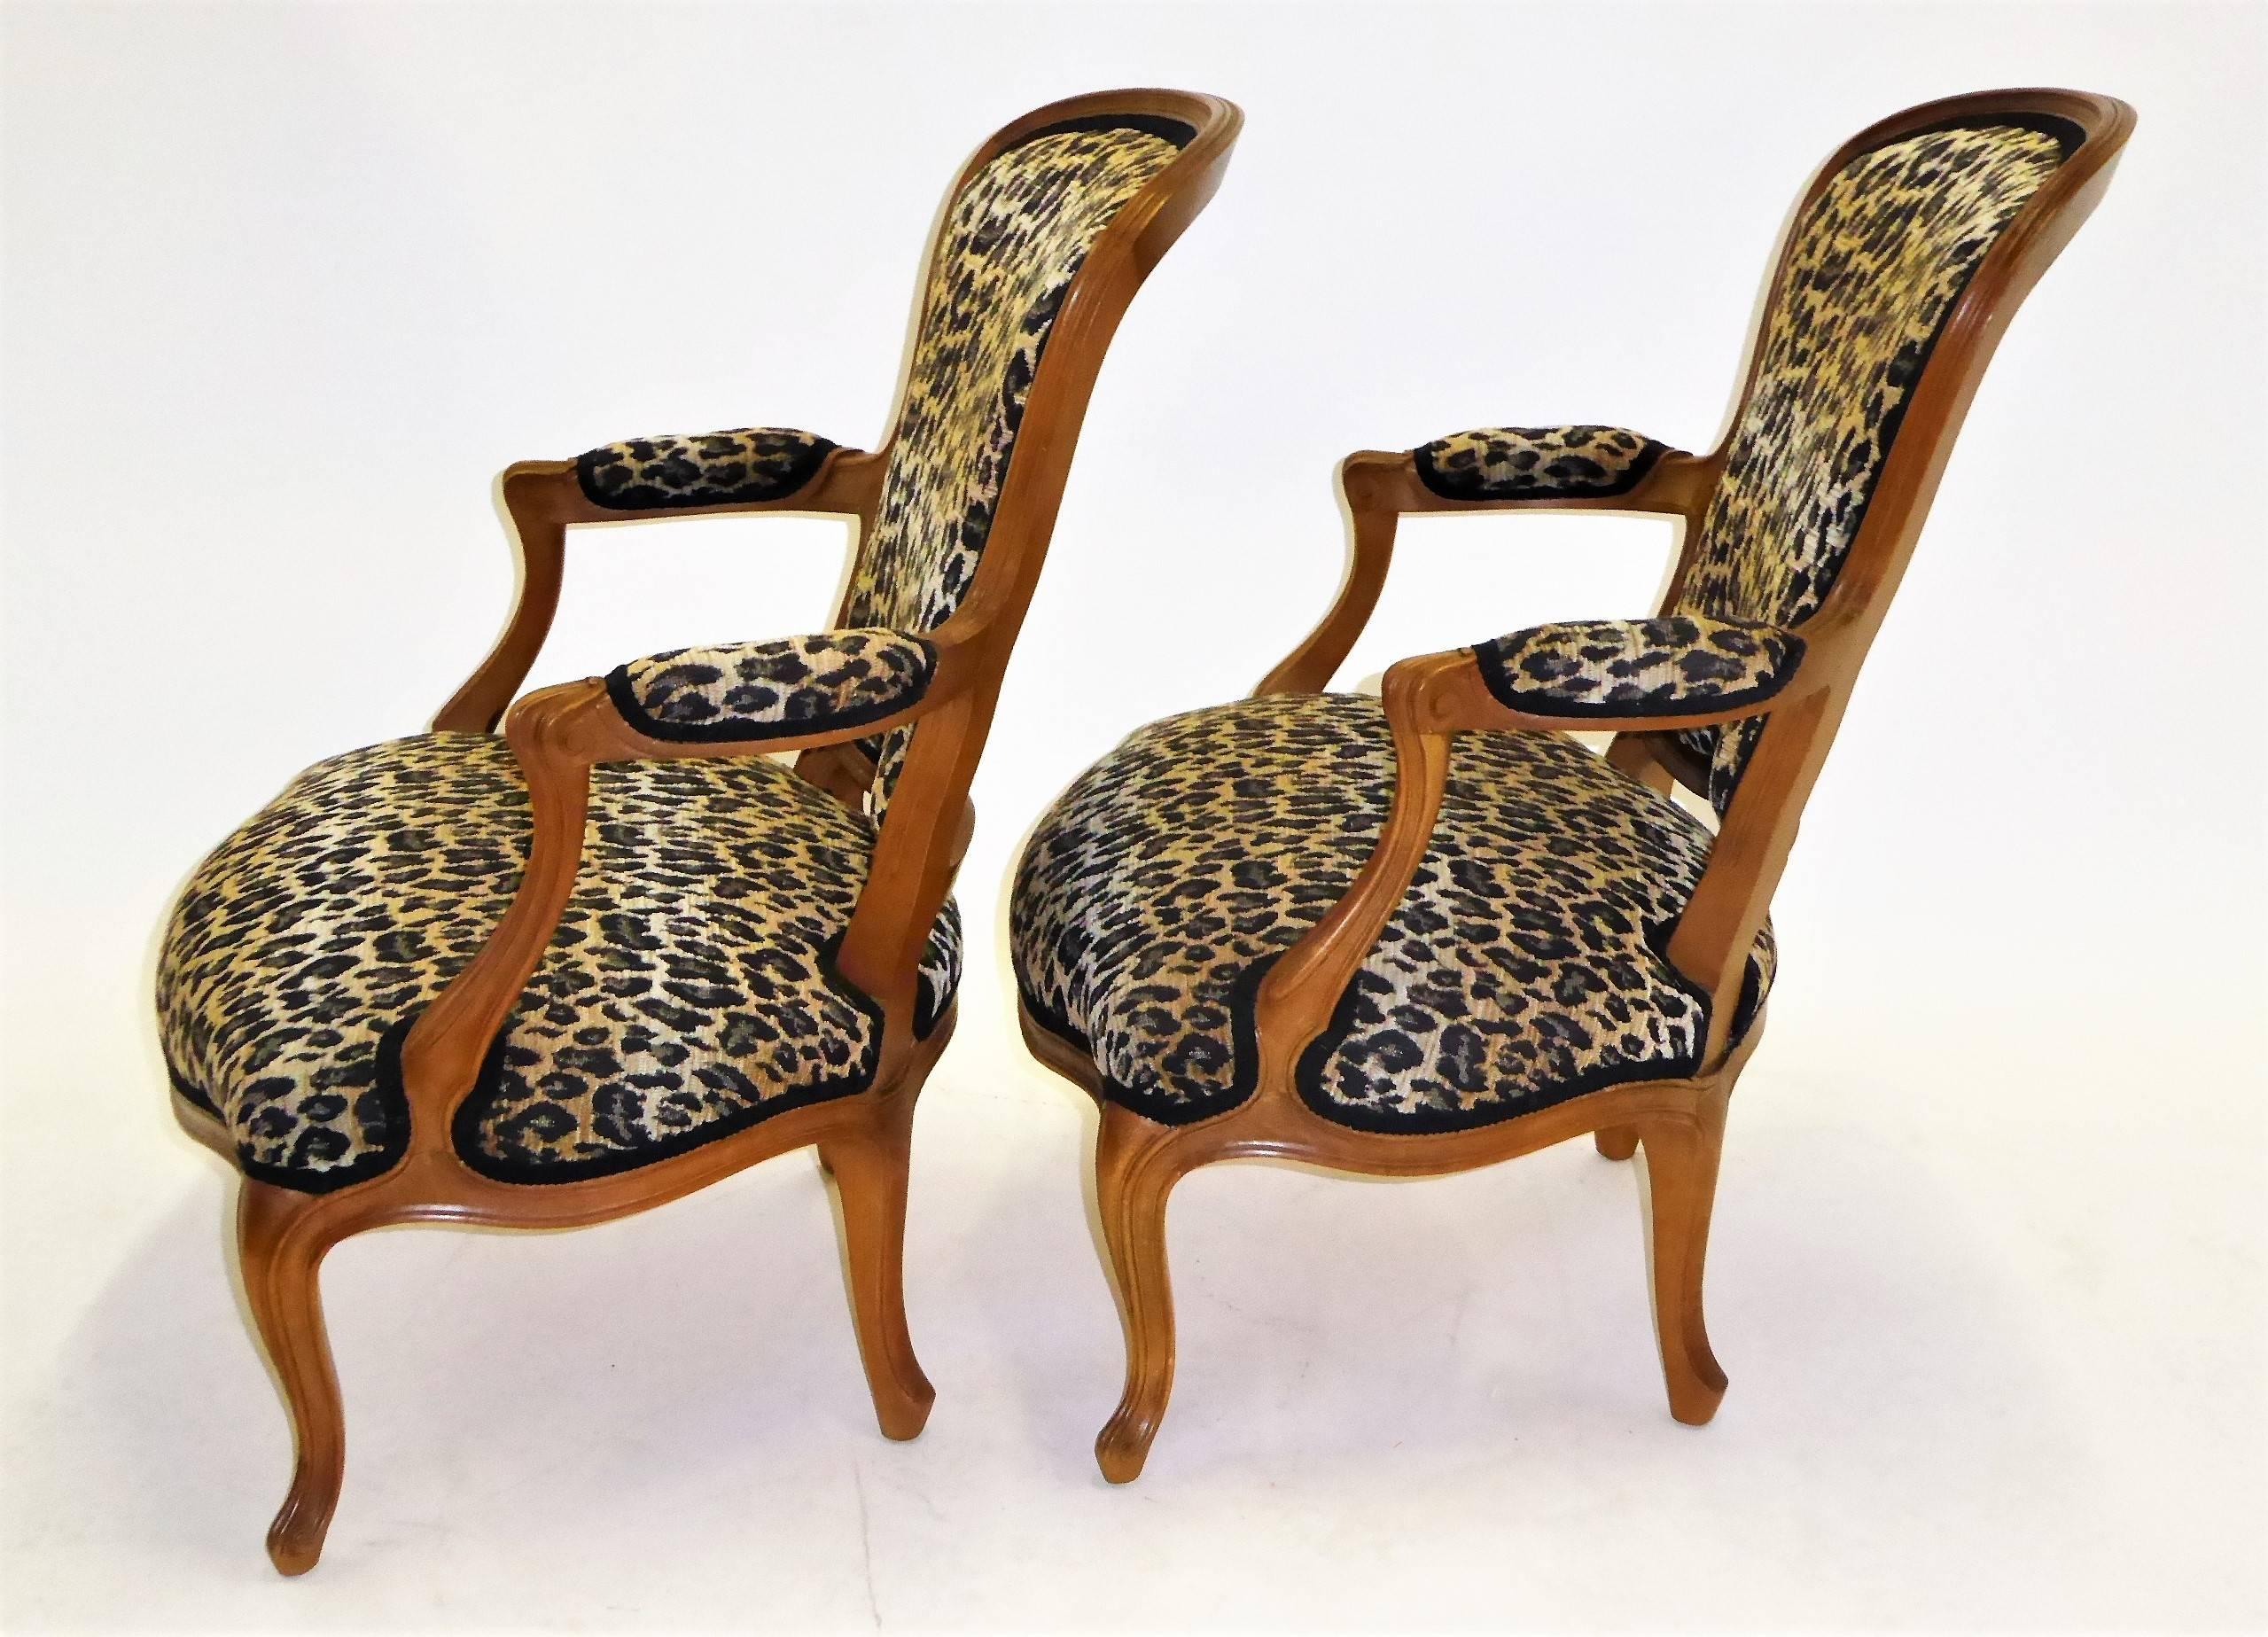 Mid-20th Century  Pair of Louis XV Style Chauffeuses or Fauteuils by Saridis in Leopard Chenille 